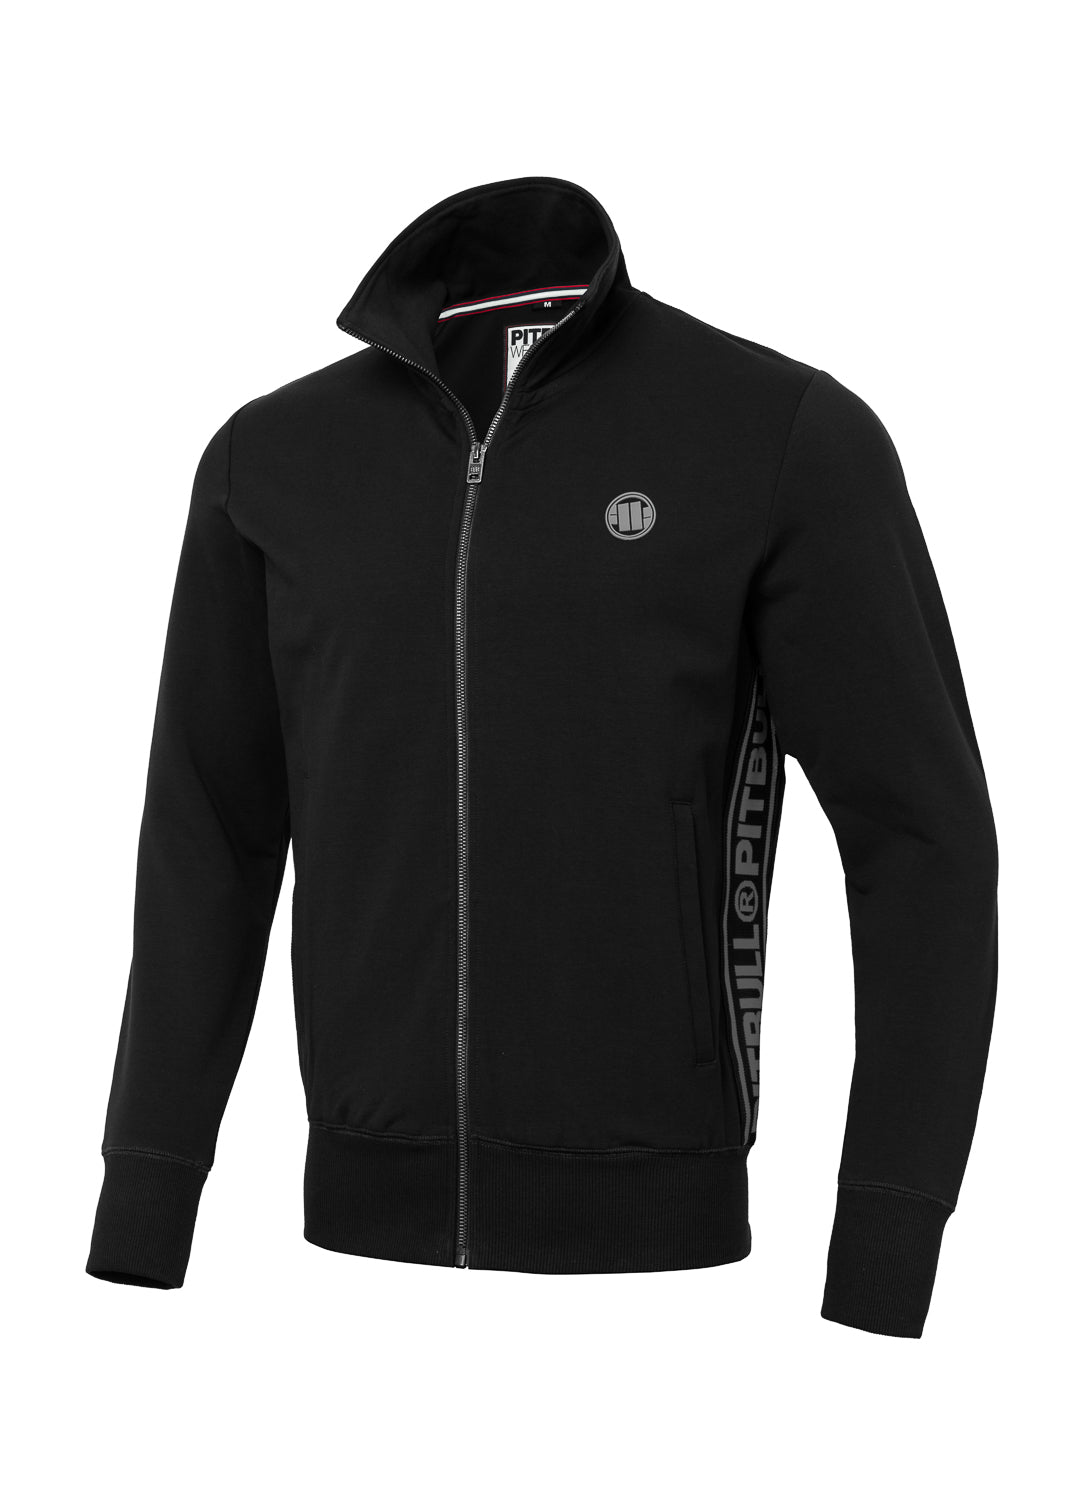 Sweatjacket French Terry VETTER Black